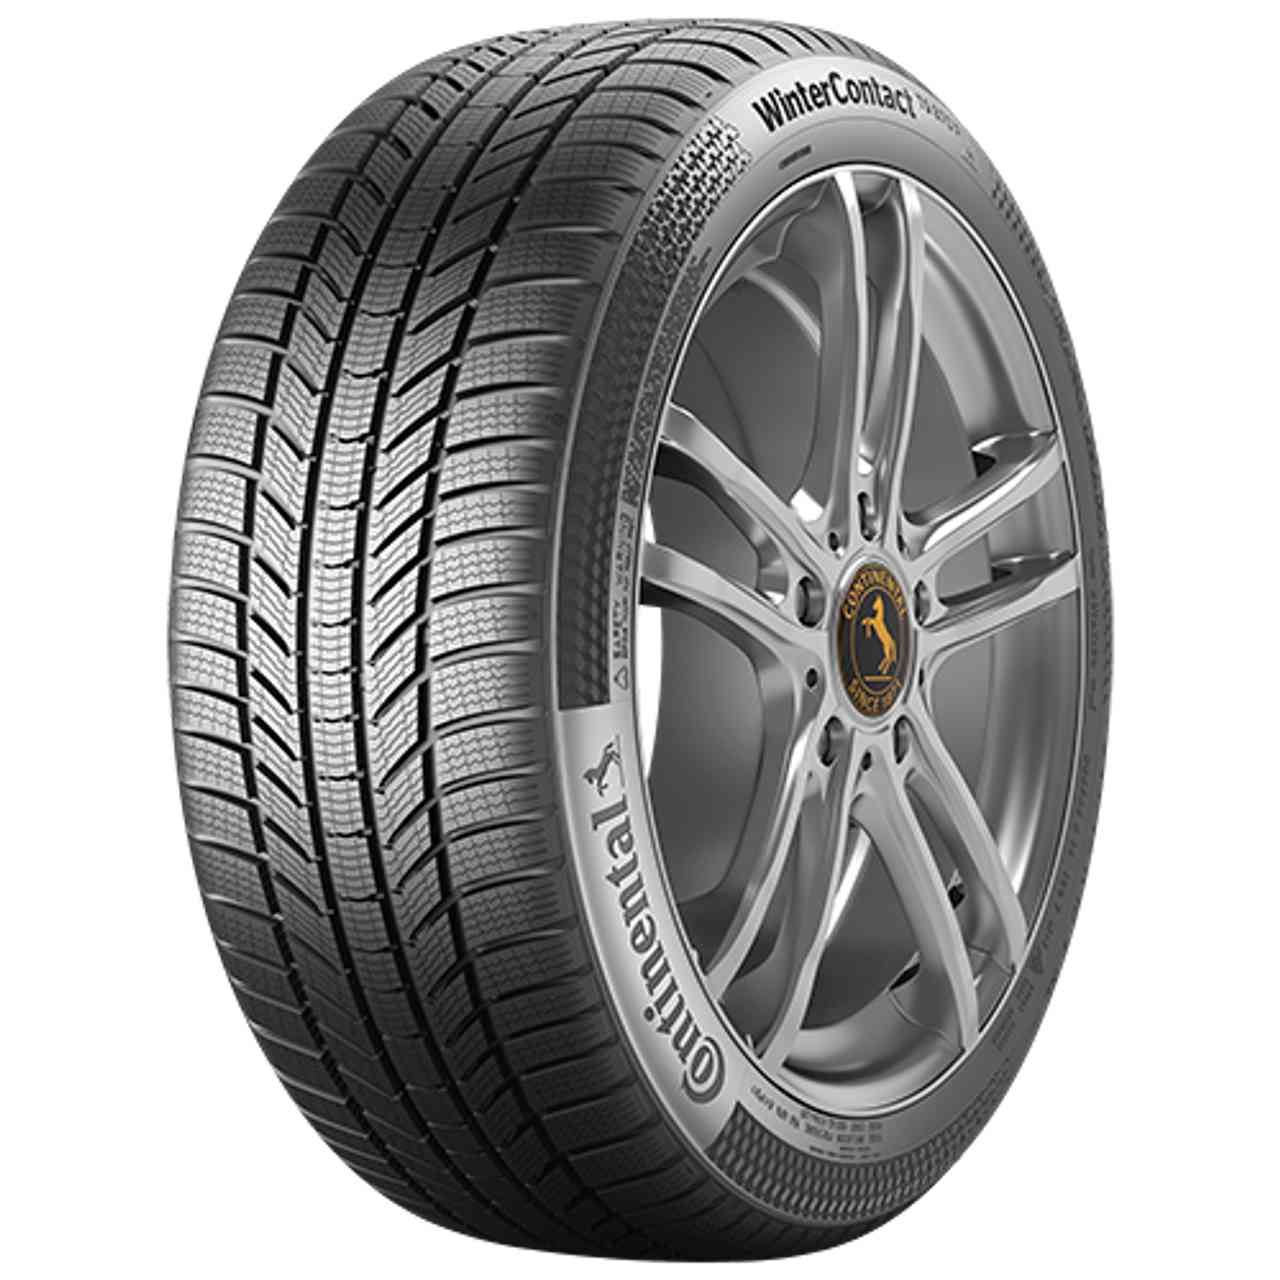 CONTINENTAL WINTERCONTACT TS 870 P (EVc) 255/45R20 101T FR BSW von Continental